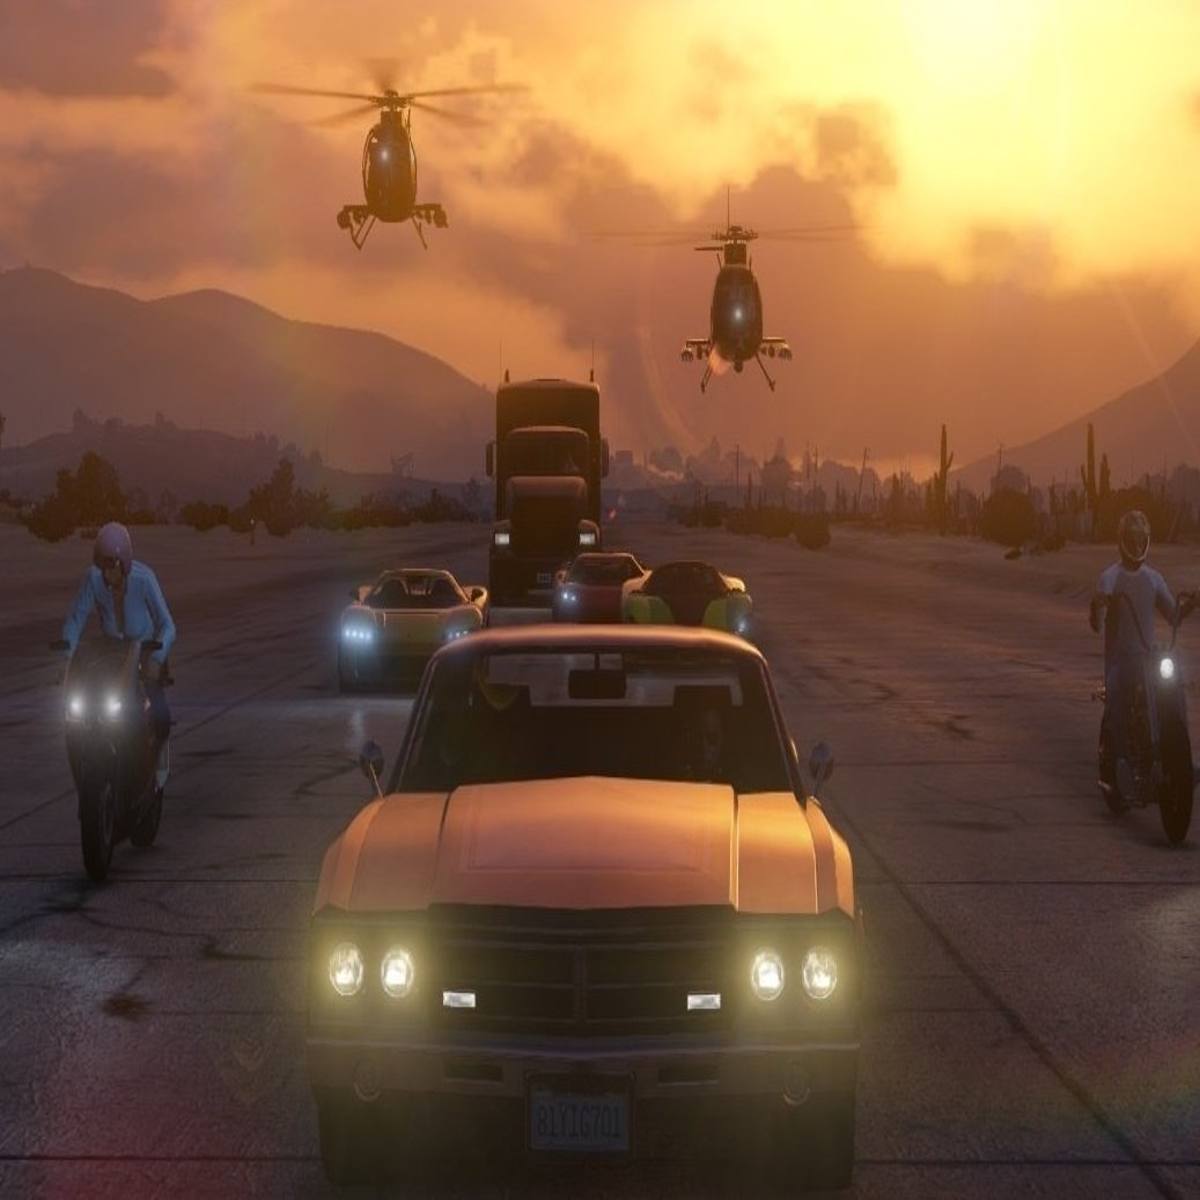 Playing GTA 5 Online 1.12 On PS3 in 2023! 